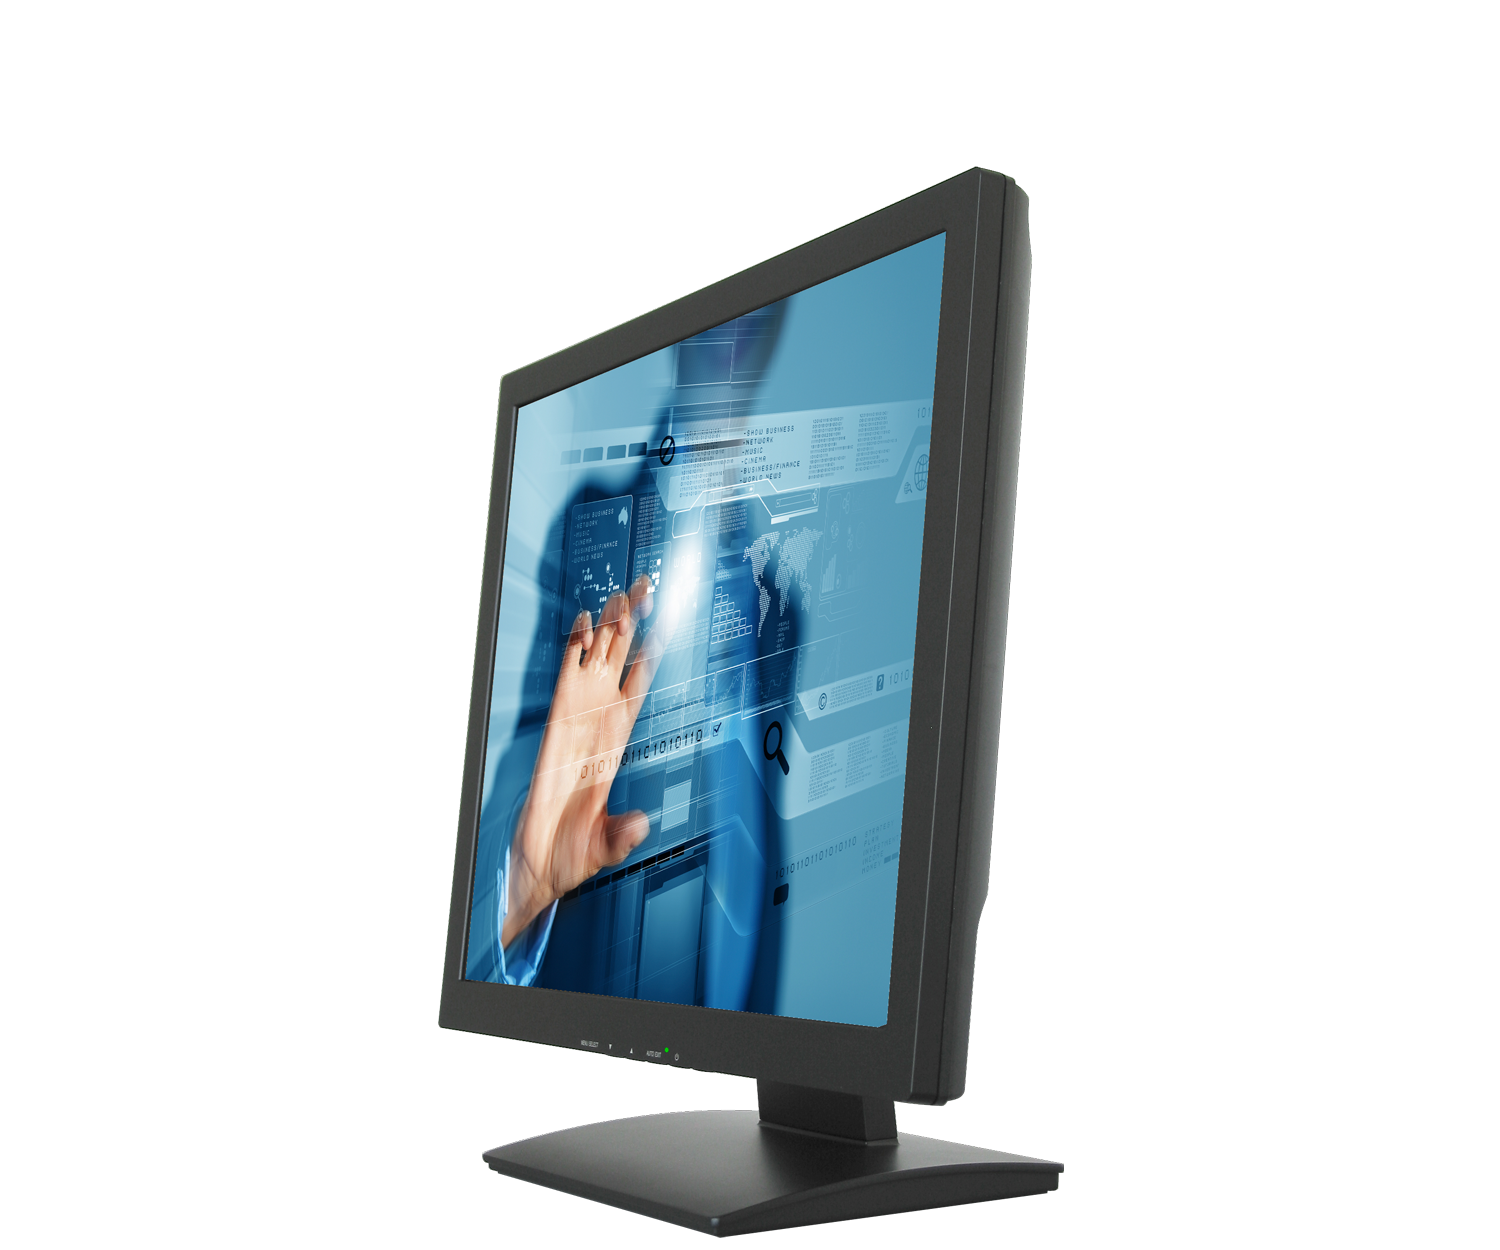 CANVYS 20" LCD TOUCH MONITOR Kassendisplay Kundendisplay VT-20WDT 